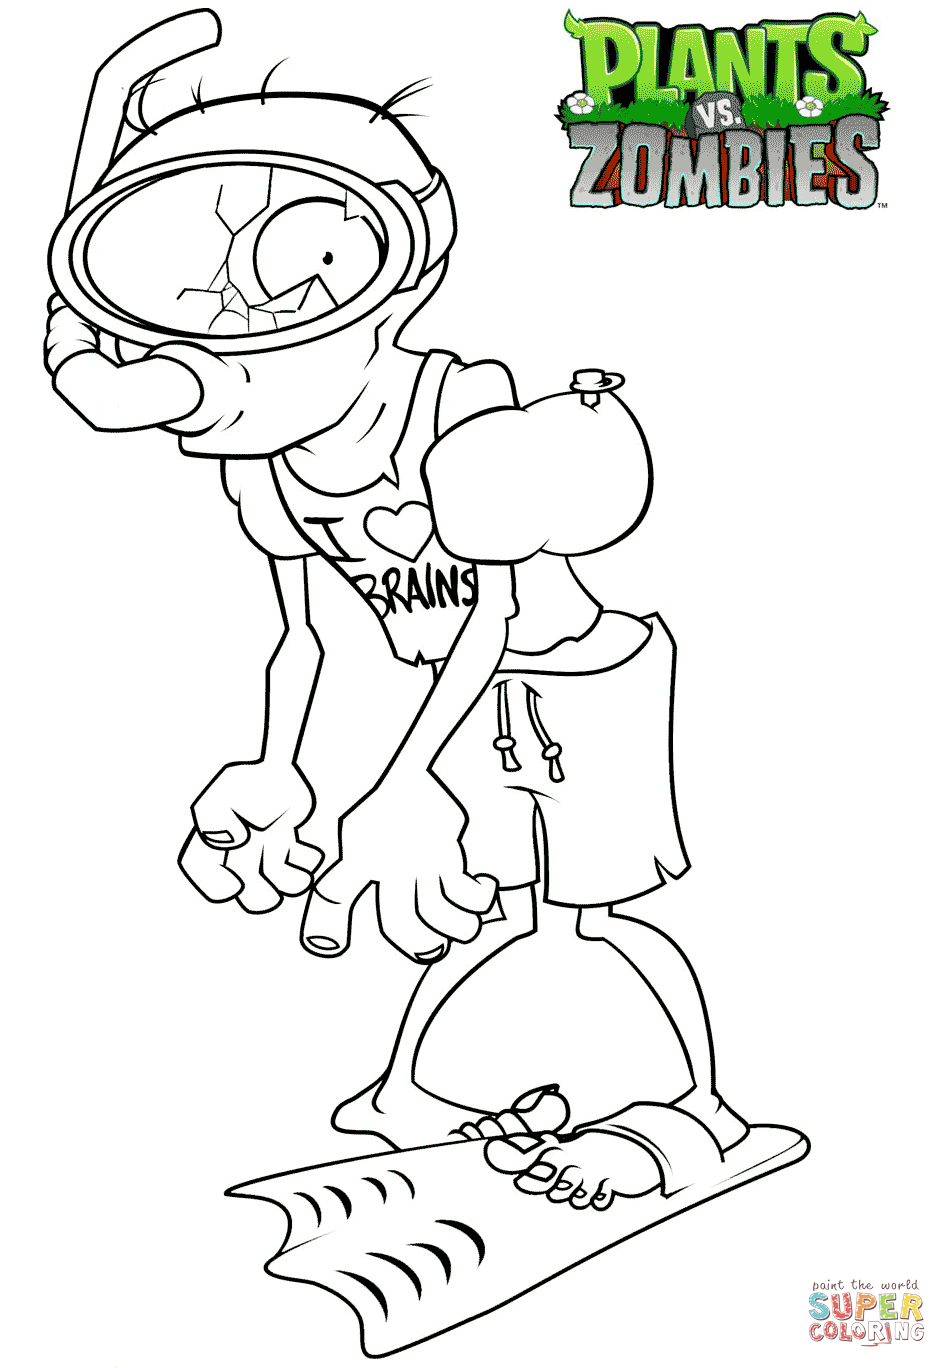 Plants Vs Zombies Coloring Pages Online - Coloring Page